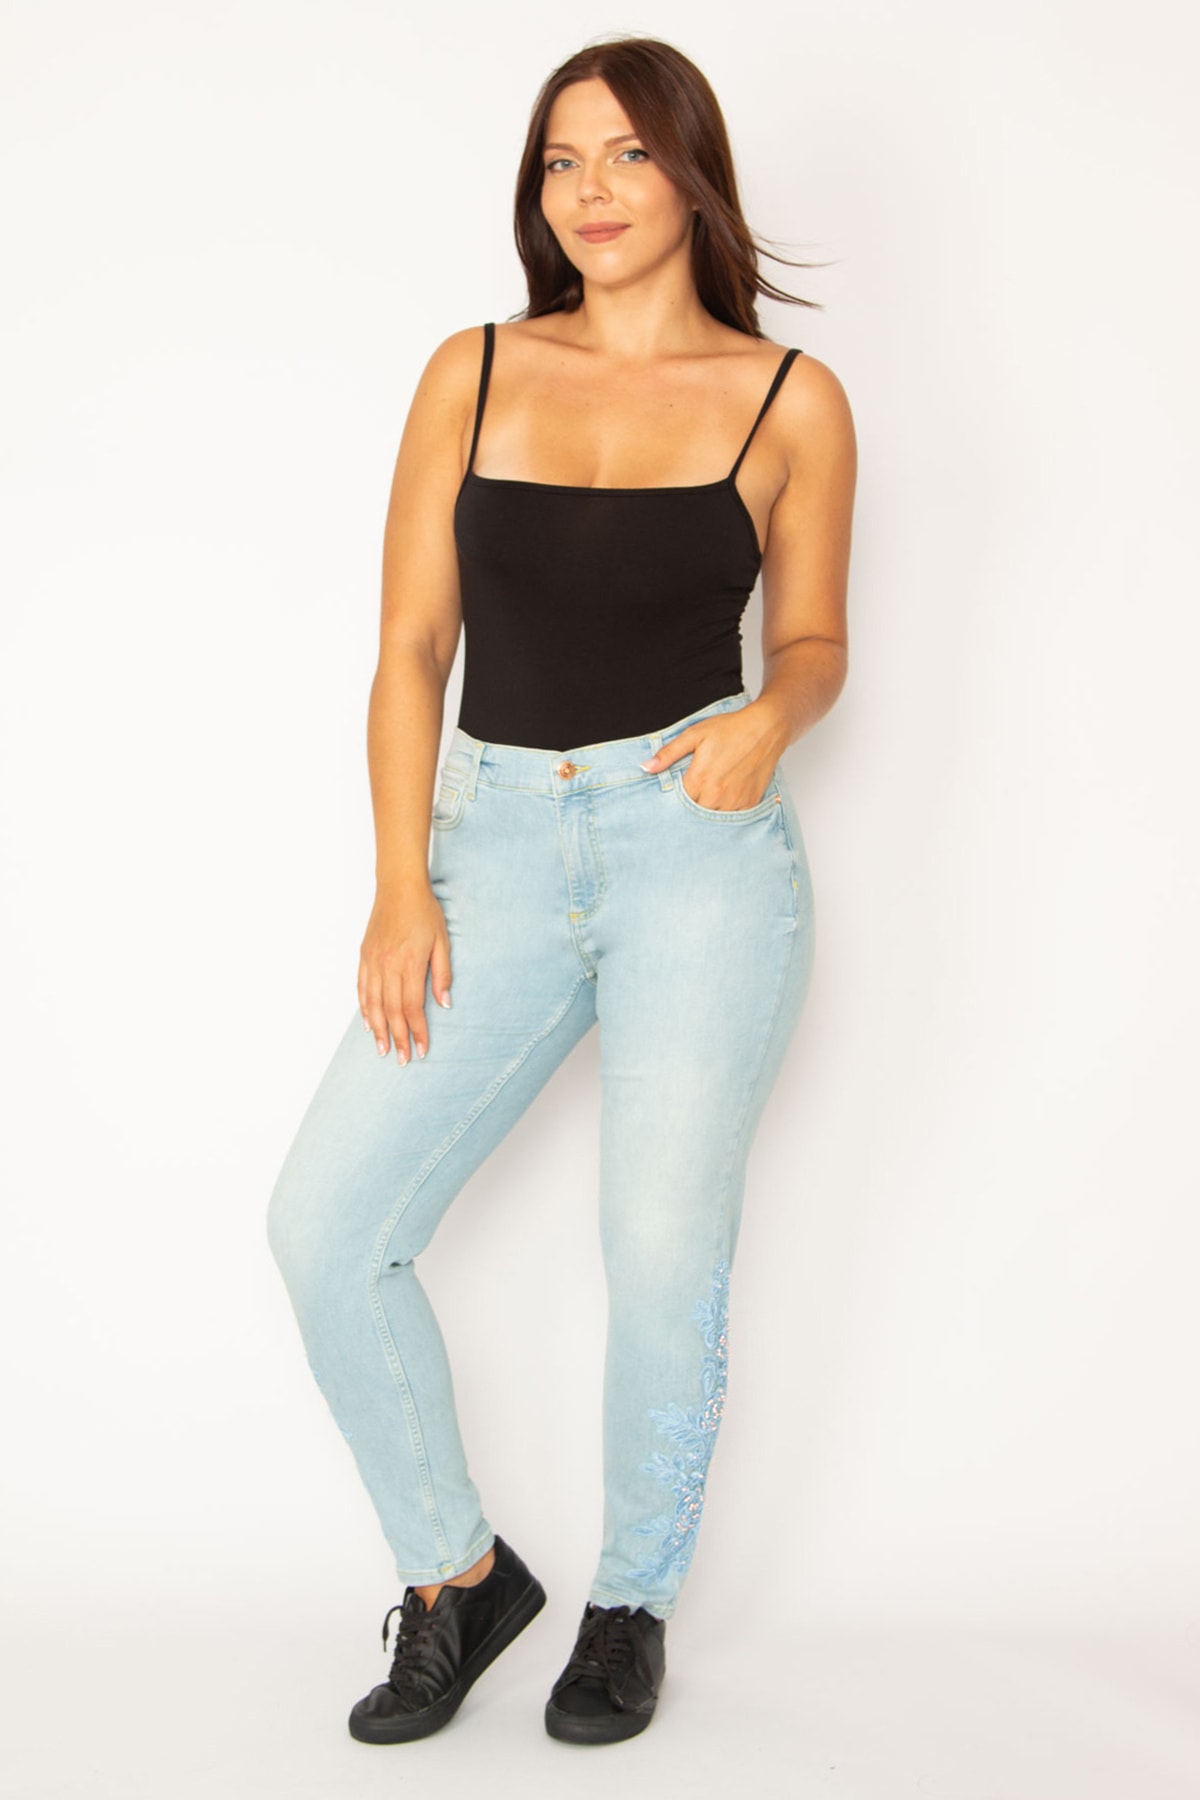 Şans Women's Blue Lycra Jeans With Lace And Pearl Detail On The Side Belt, Elasticated.